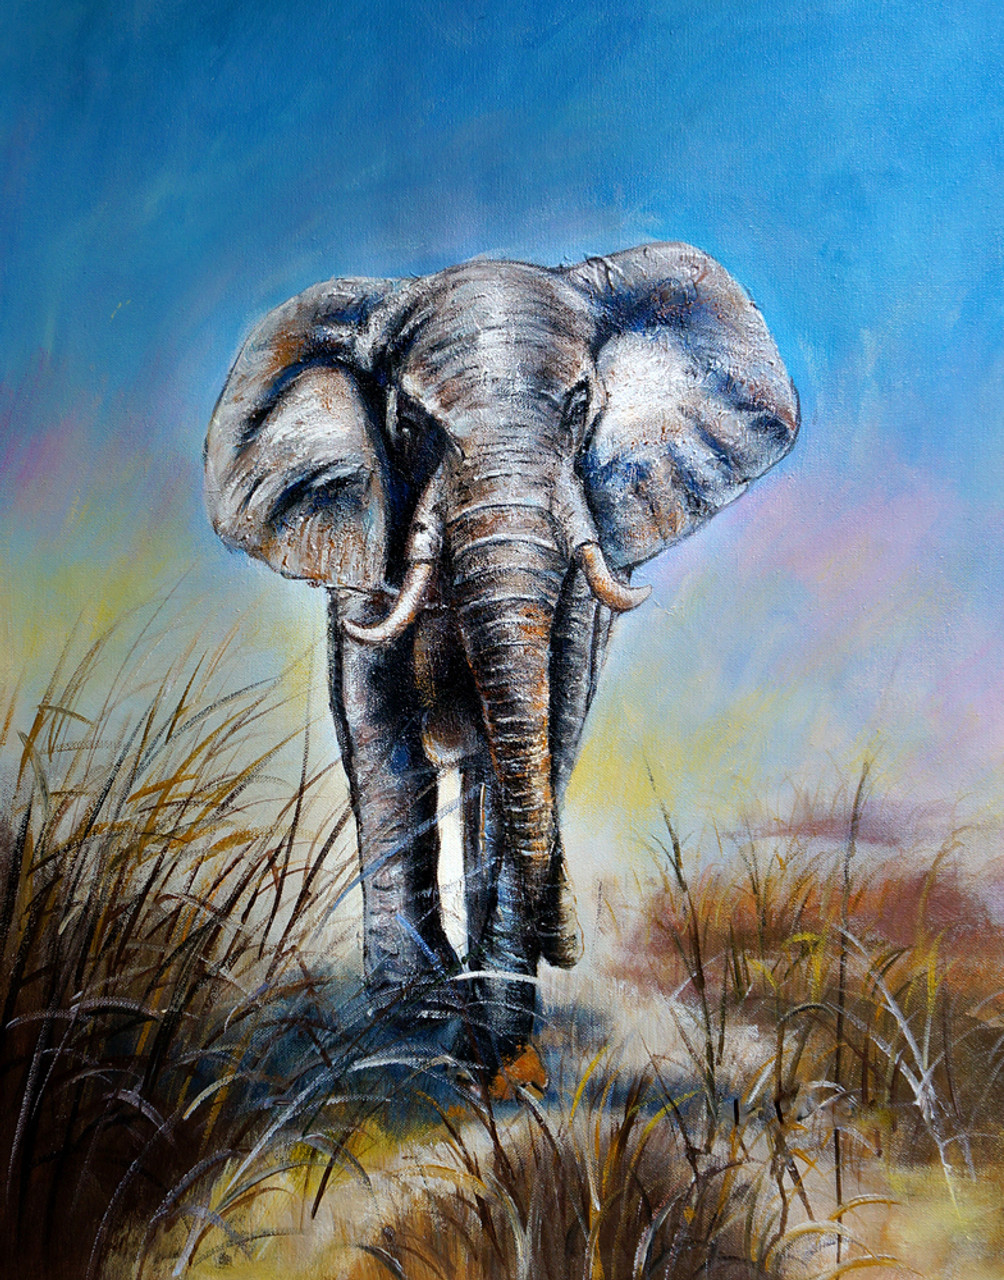 Buy Wild Life - Tusker by Community Artists Group@ Rs. 5490. Code ...